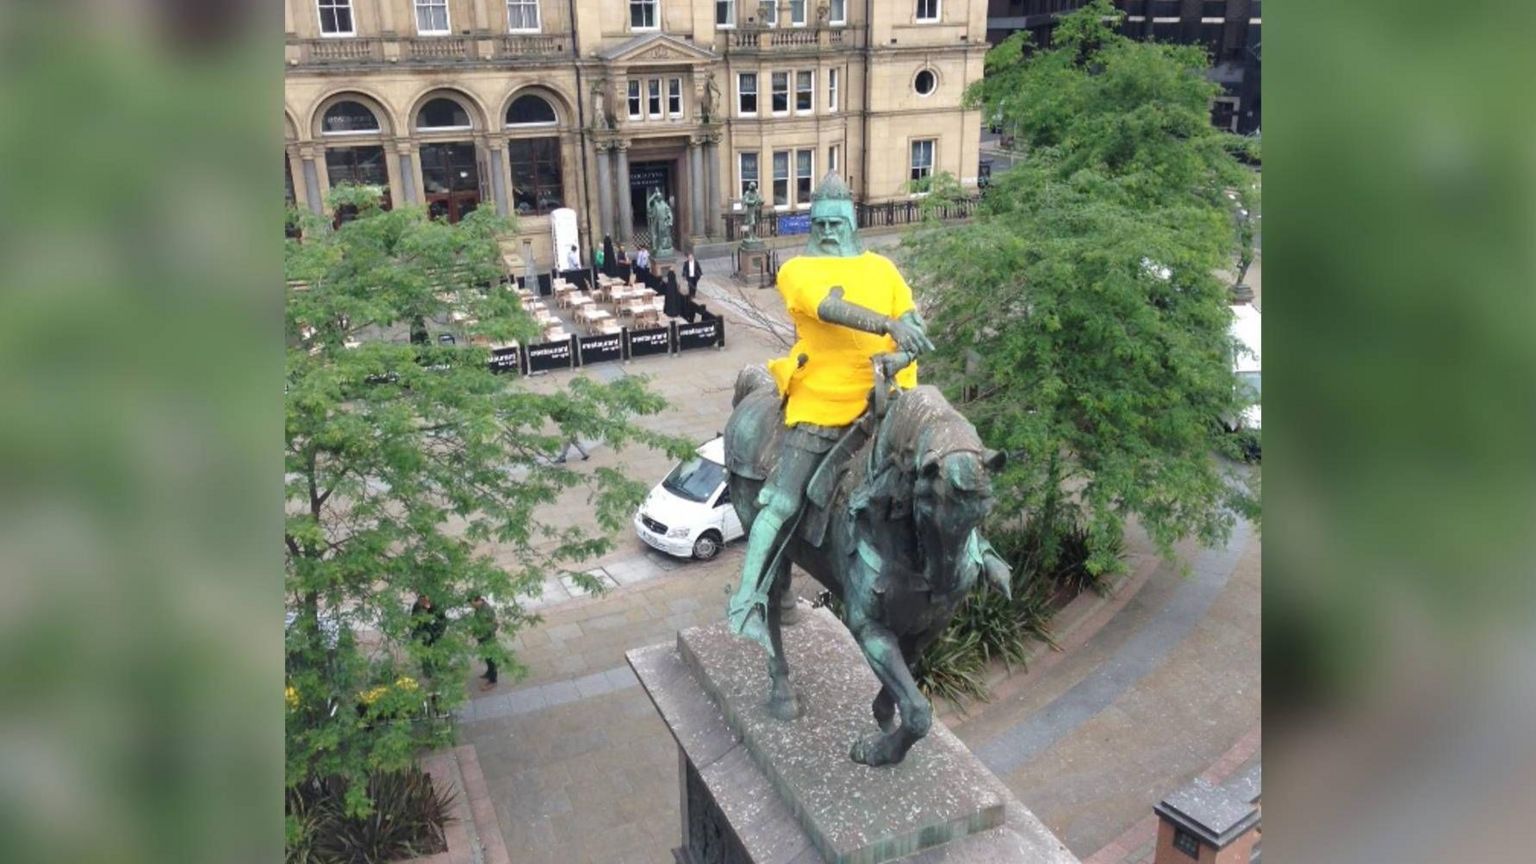 The Black Prince statue on City Square in Leeds was dressed up for the event